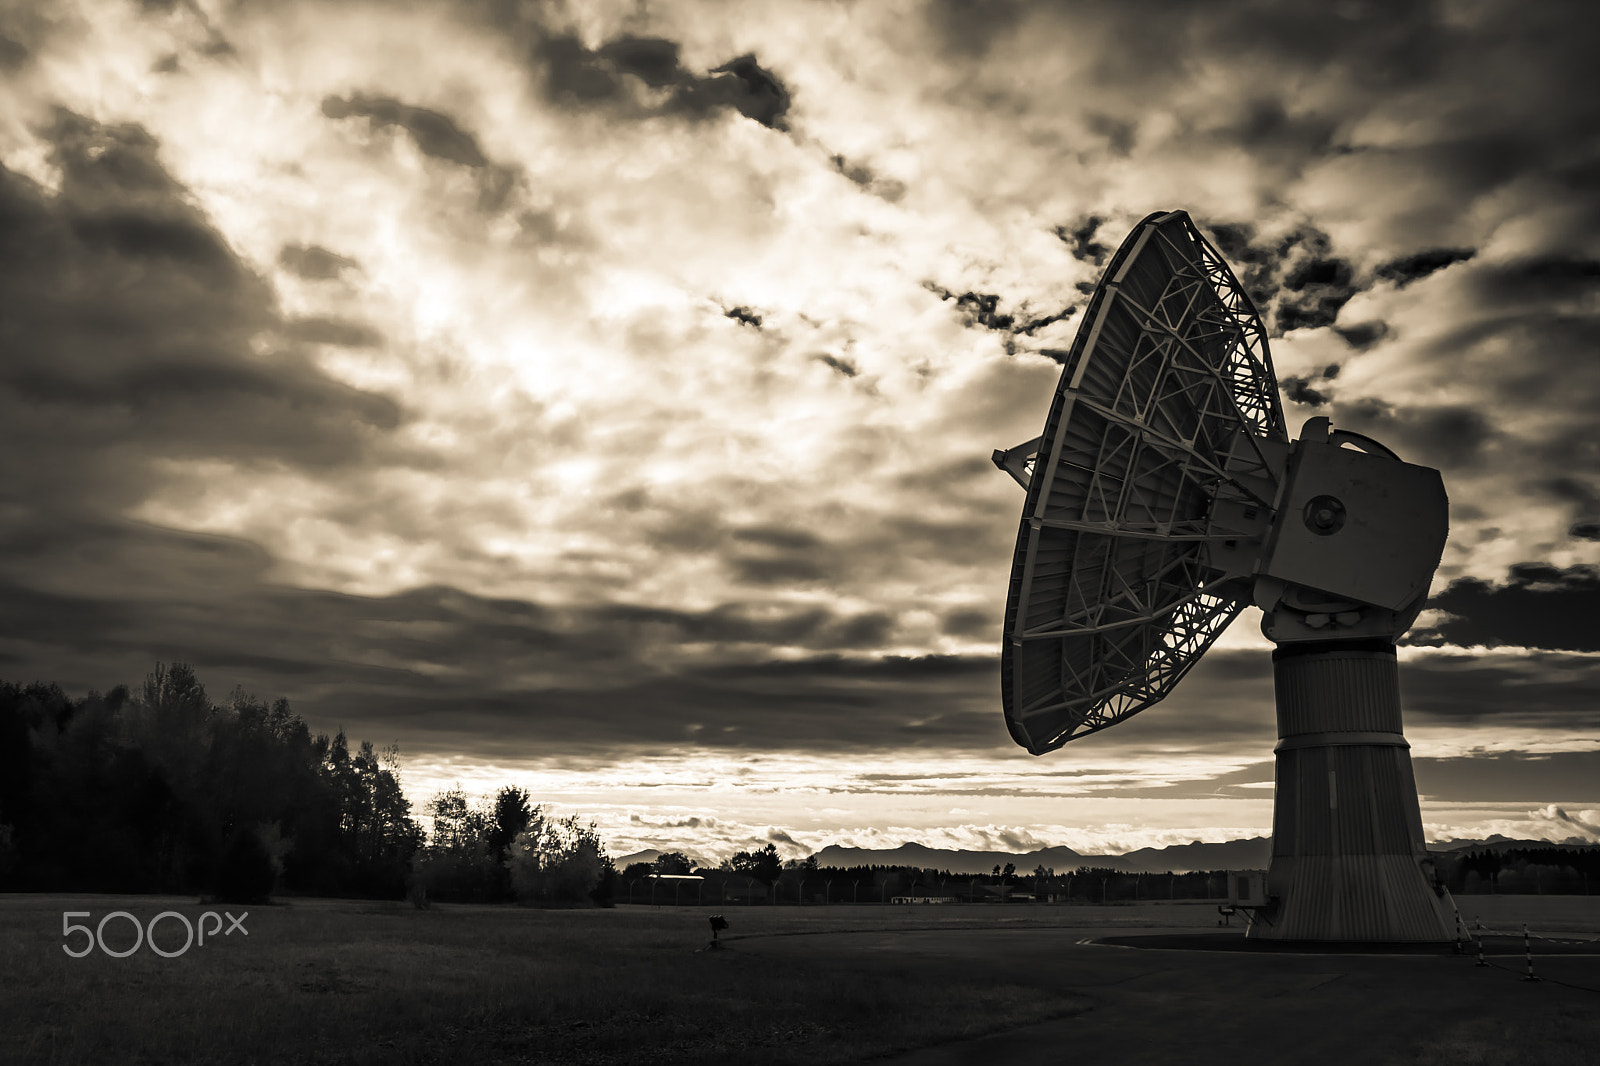 Canon EOS 40D sample photo. Robert emmerich - 64 b+w dlr satellite antenna at sunset in weilheim - germany photography